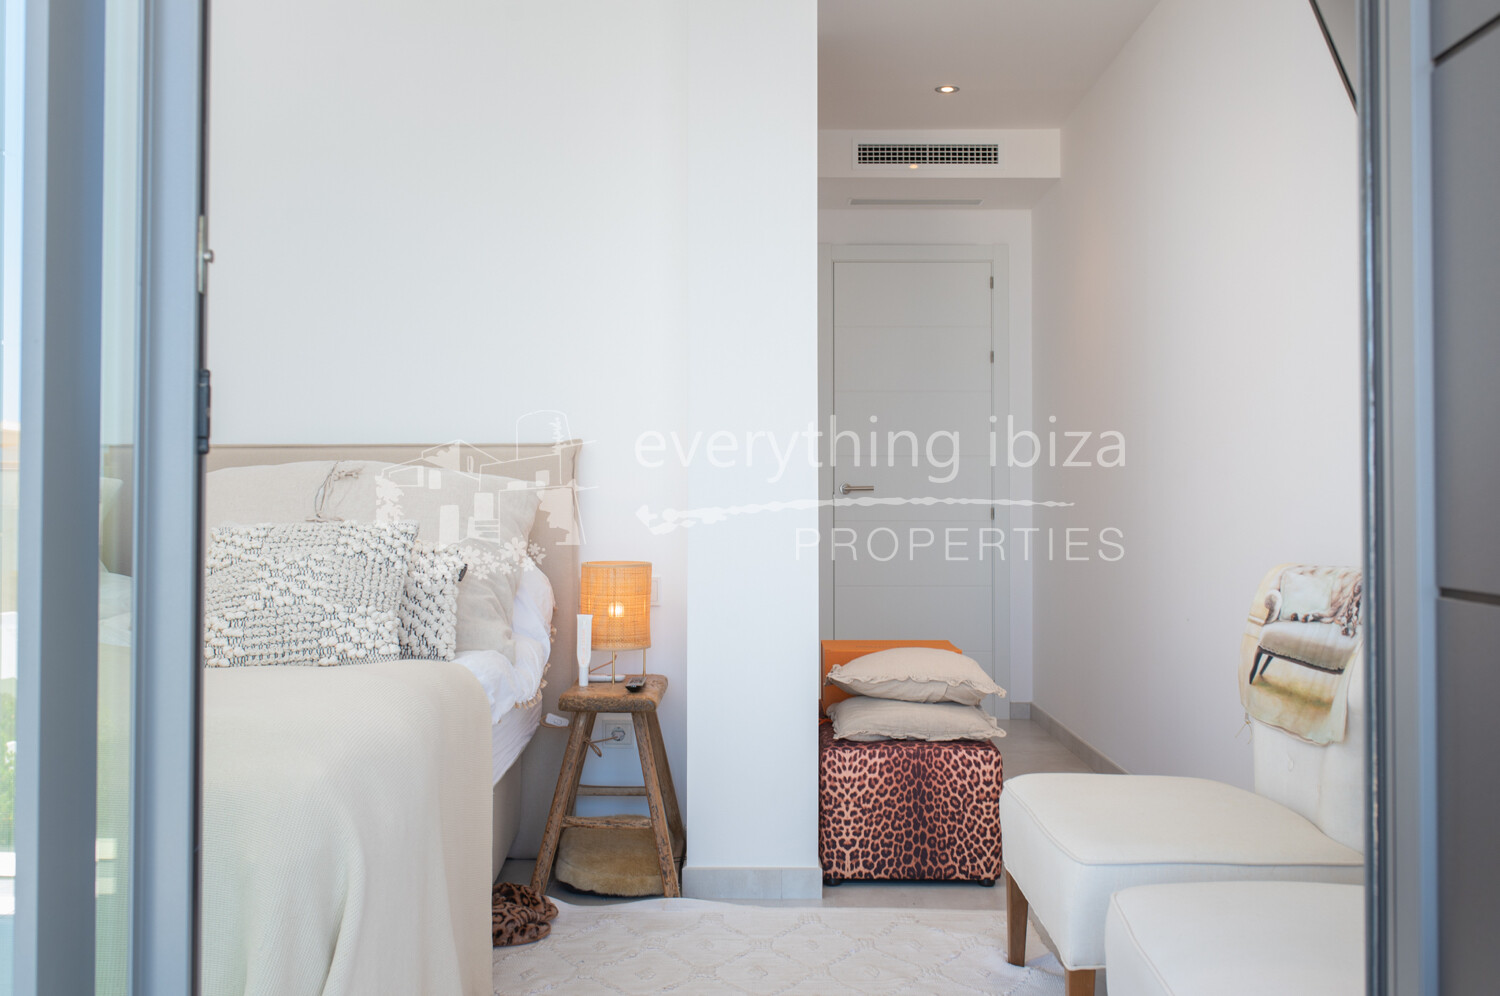 Exquisite Frontline 3 Bed Penthouse with Stunning Sea & Sunset Views, ref. 1725, for sale in Ibiza by everything ibiza Properties